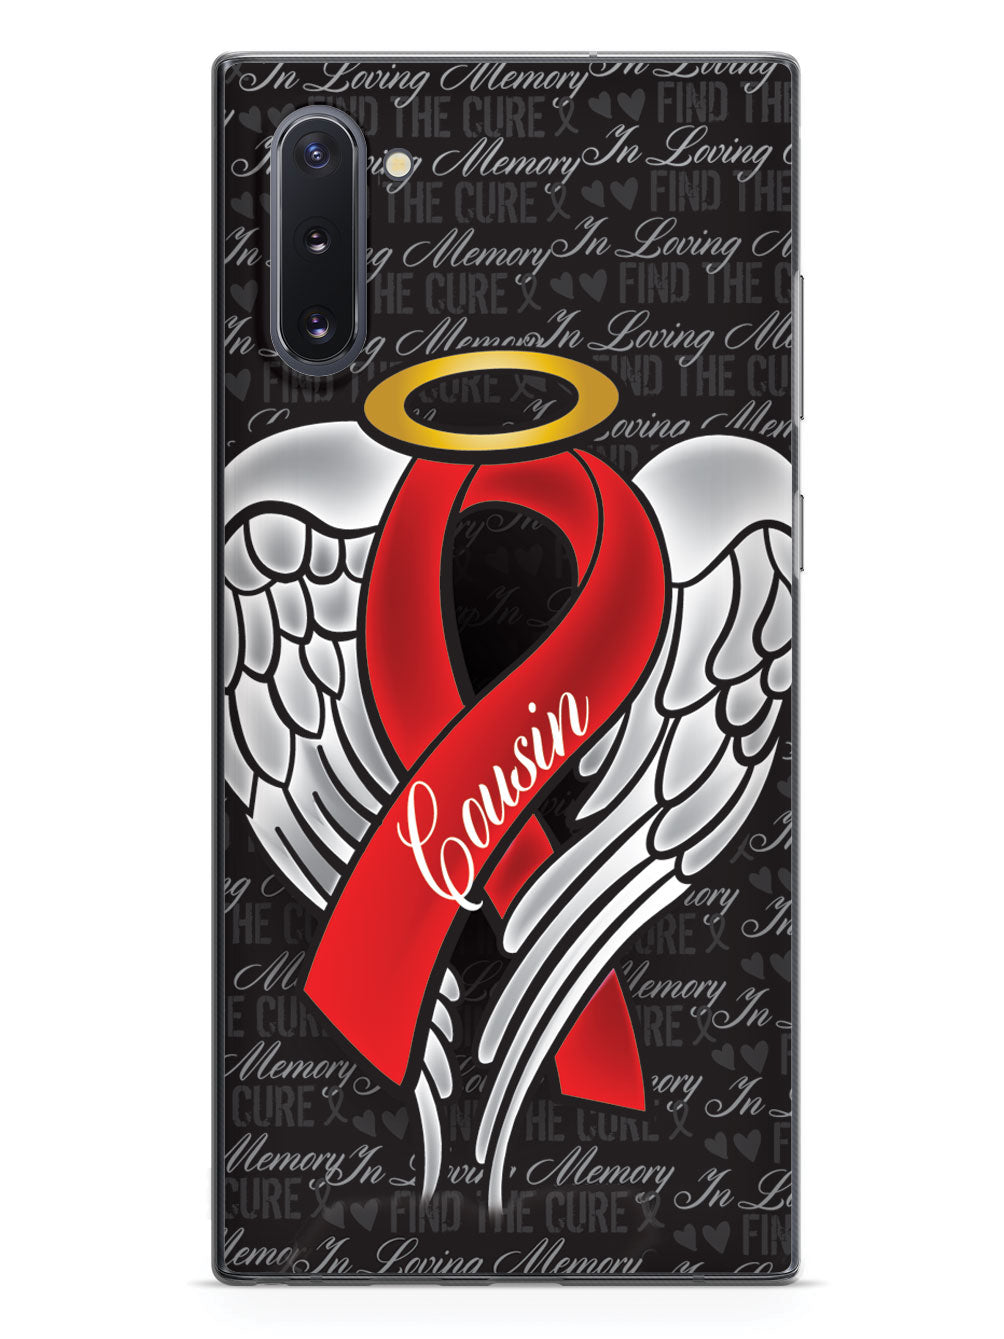 In Loving Memory of My Cousin - Red Ribbon Case